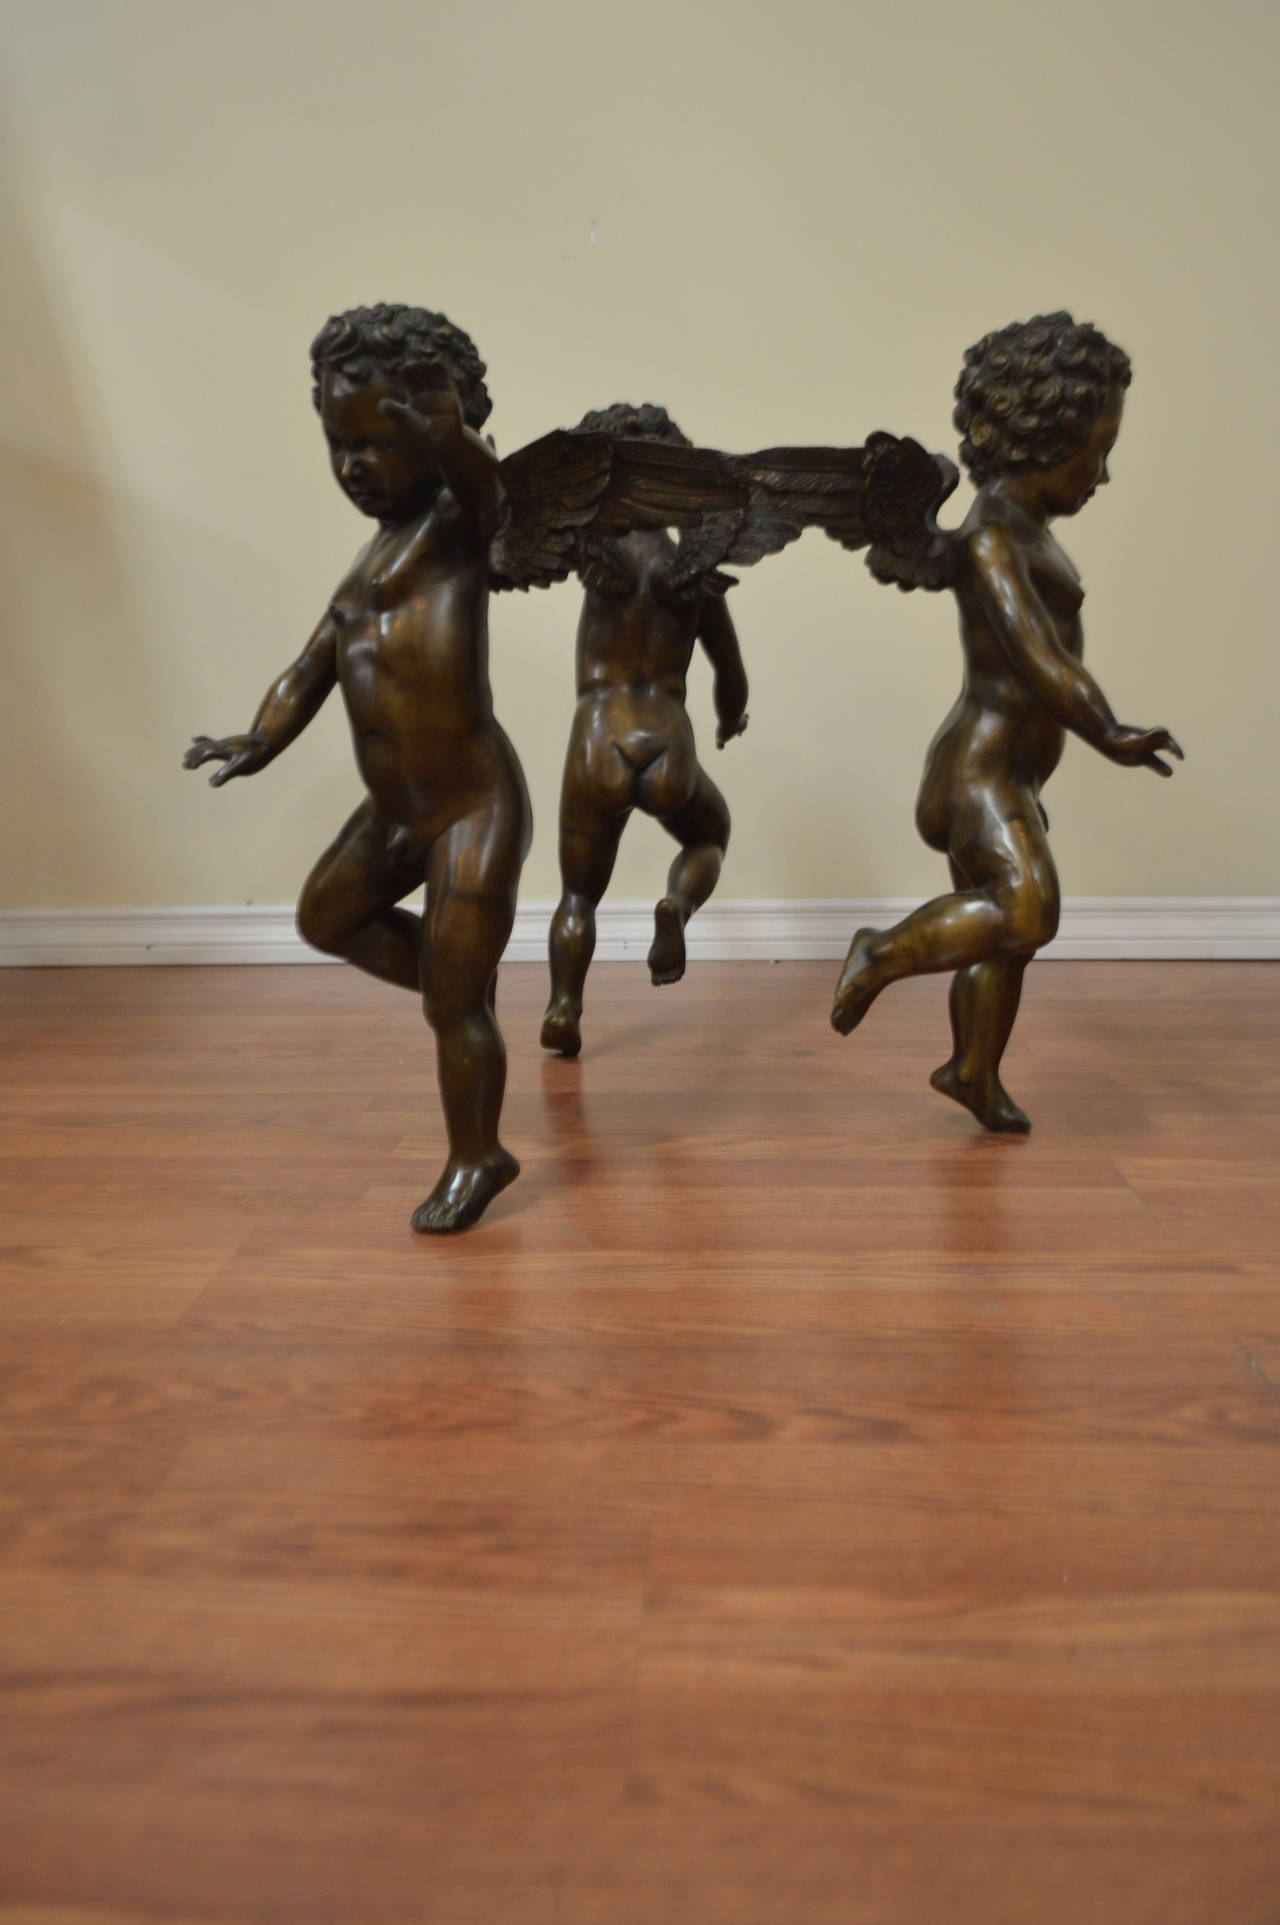 Most unusual circle formed by three bronze cherubs joined at their wings to hold a glass top cocktail table.